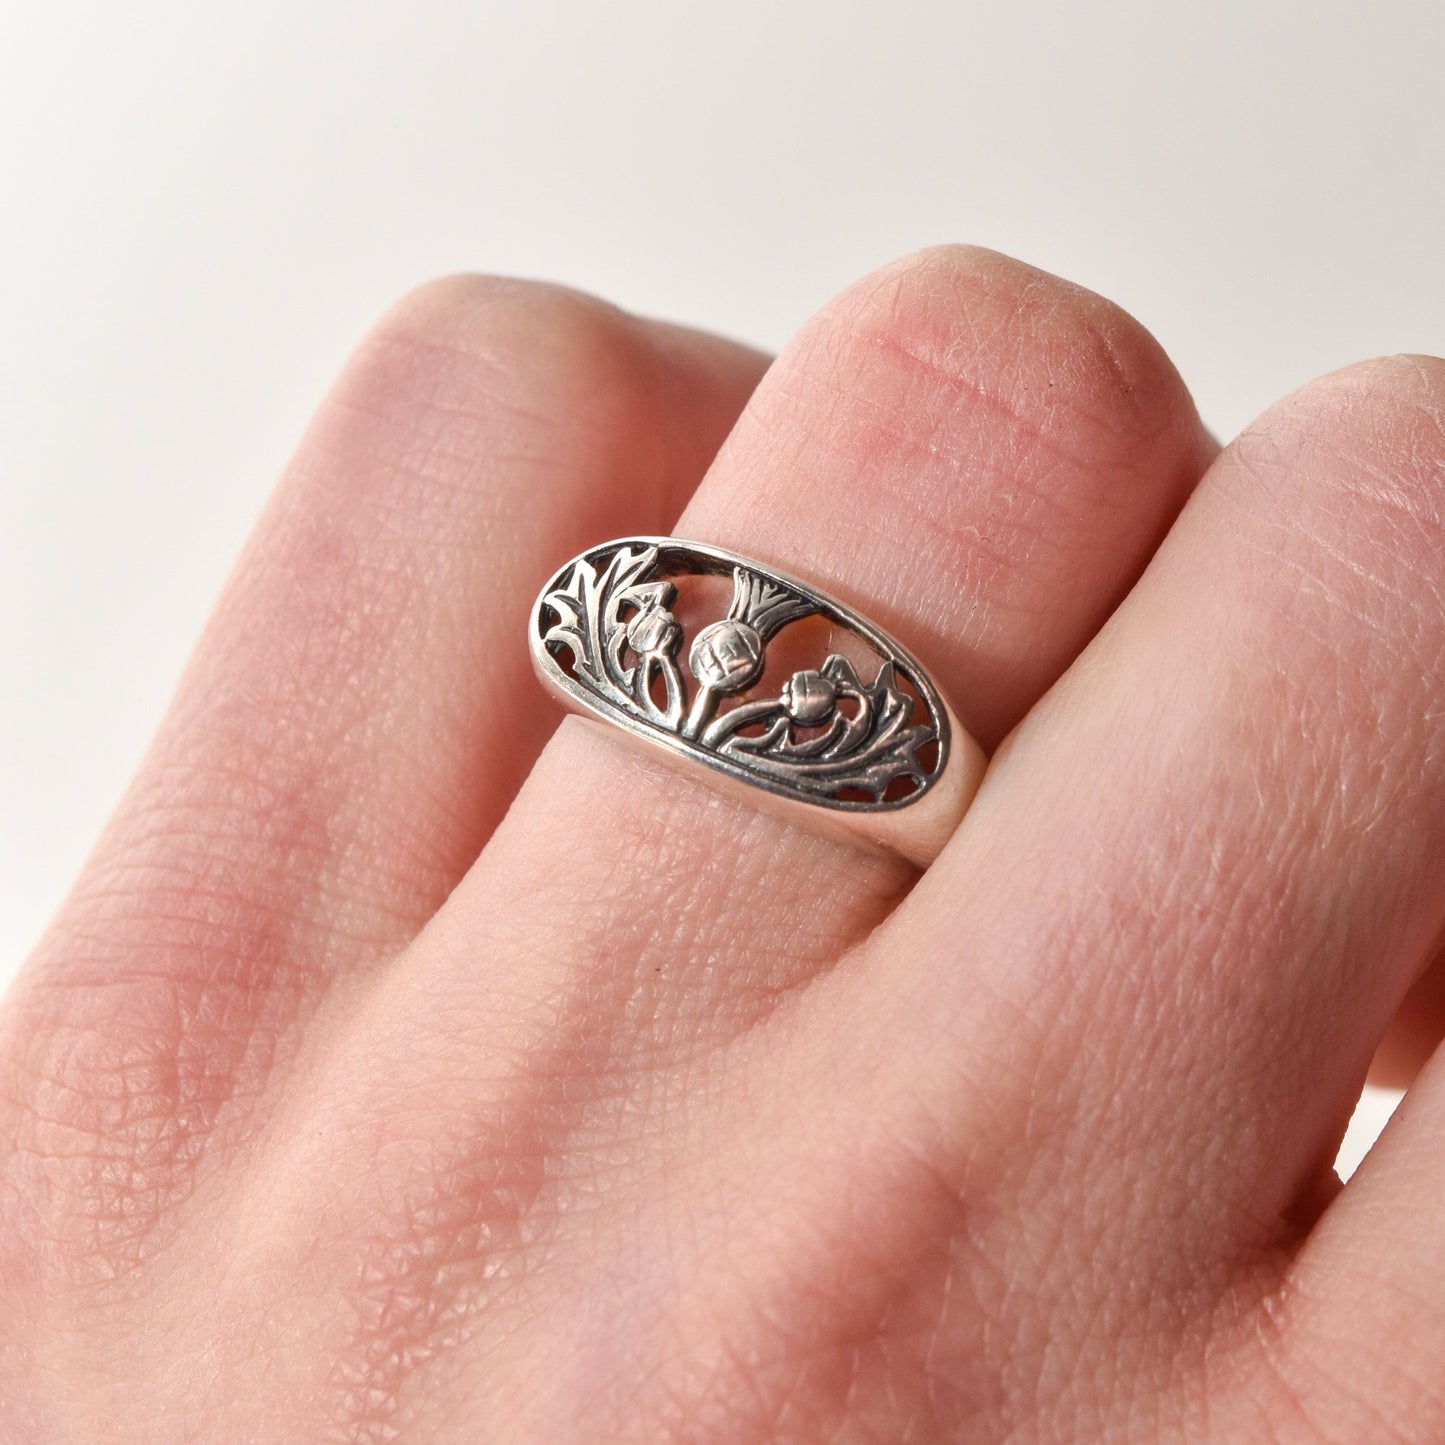 Sterling Silver Scottish Thistle Ring, Openwork Design, Cute Silver Stacking Ring, Size 7 US